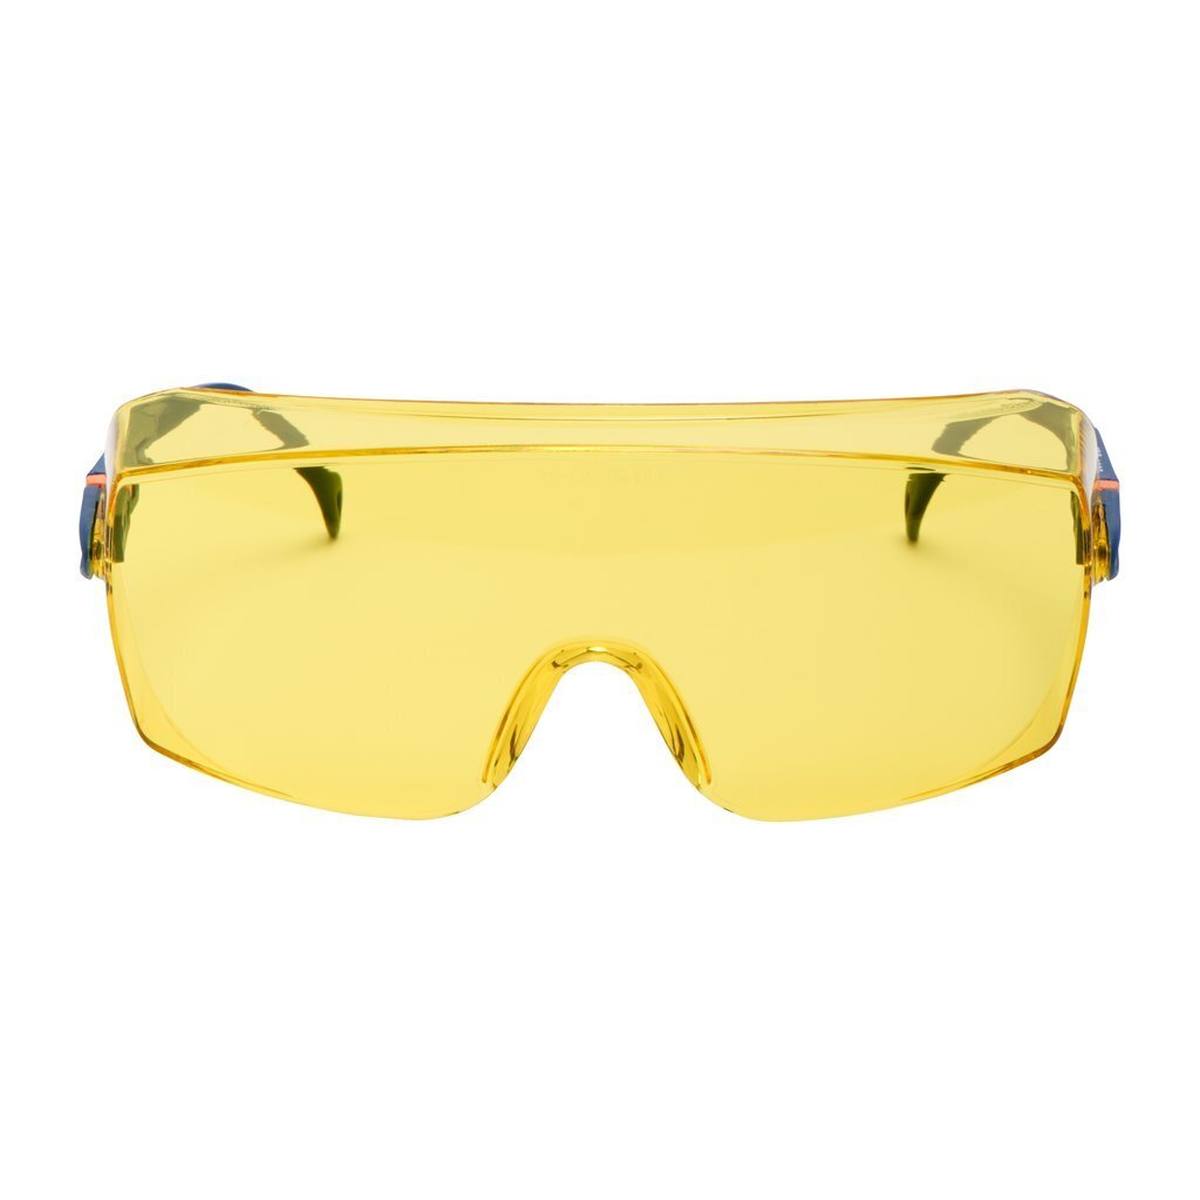 3M 2802 Safety goggles AS/UV, PC, yellow tinted, adjustable, ideal as over-glasses for spectacle wearers